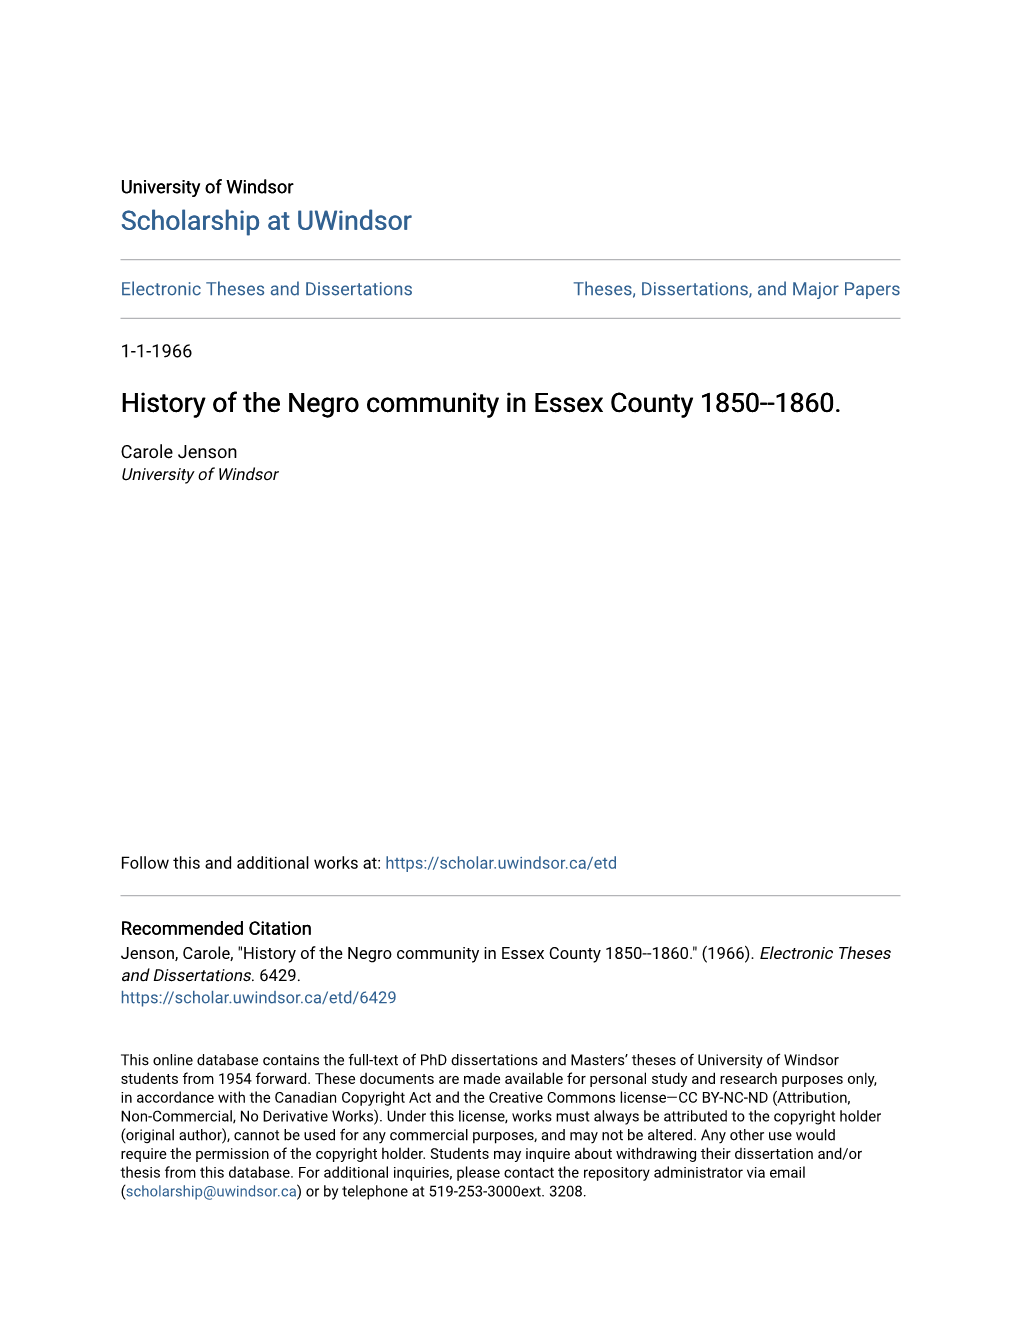 History of the Negro Community in Essex County 1850--1860